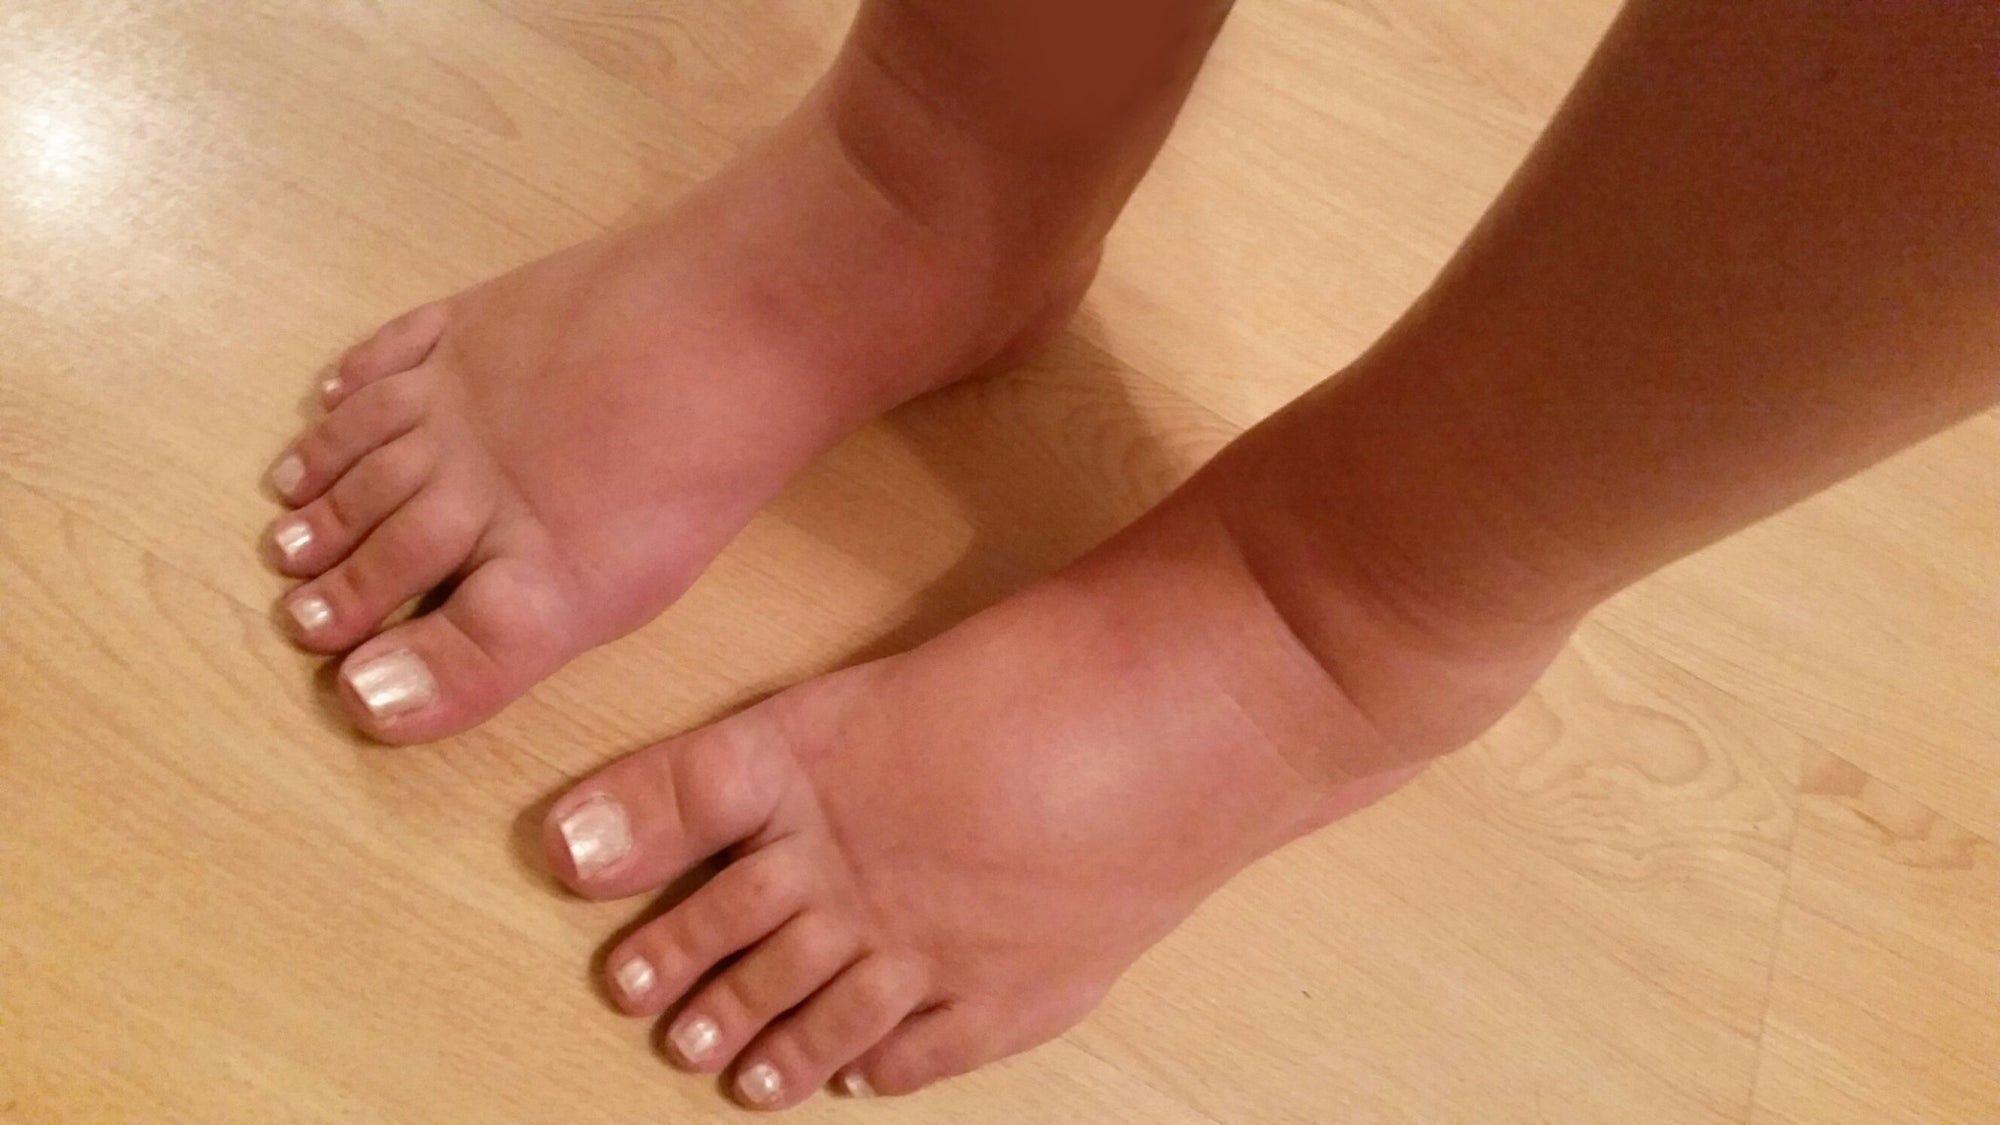 How to Relieve Swollen Feet and Ankles When Pregnant